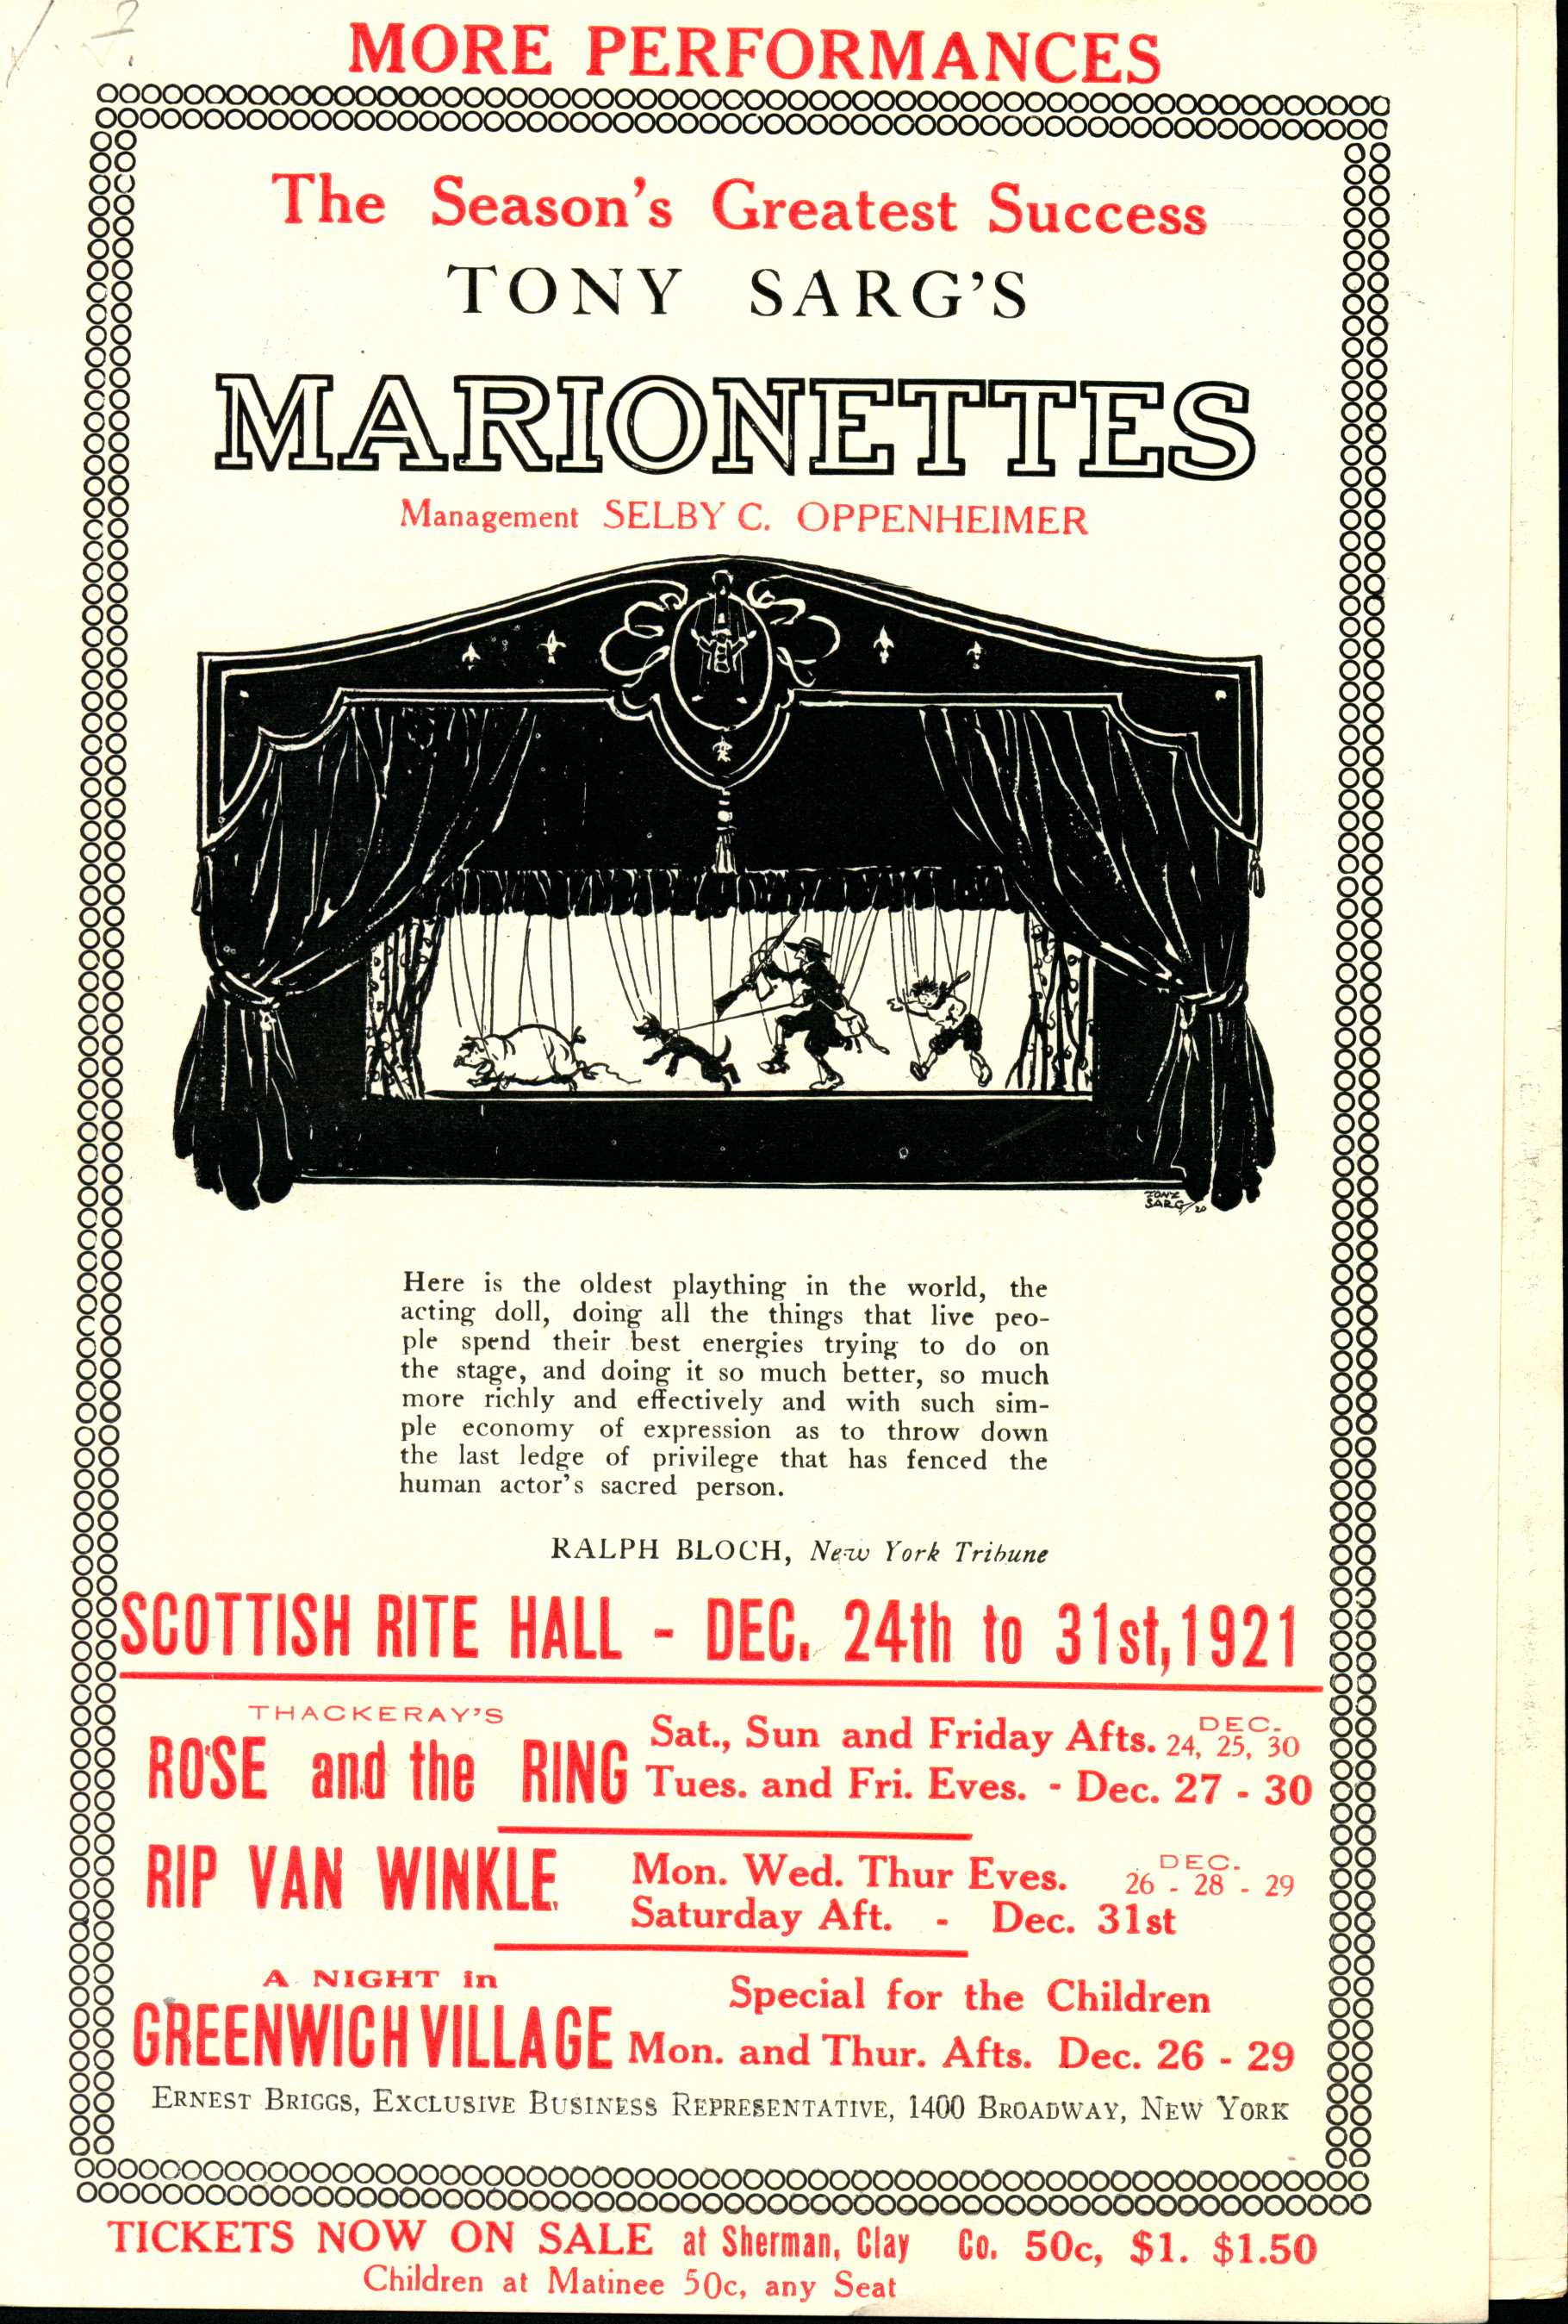 Shows play information and a scene of a marionette stage